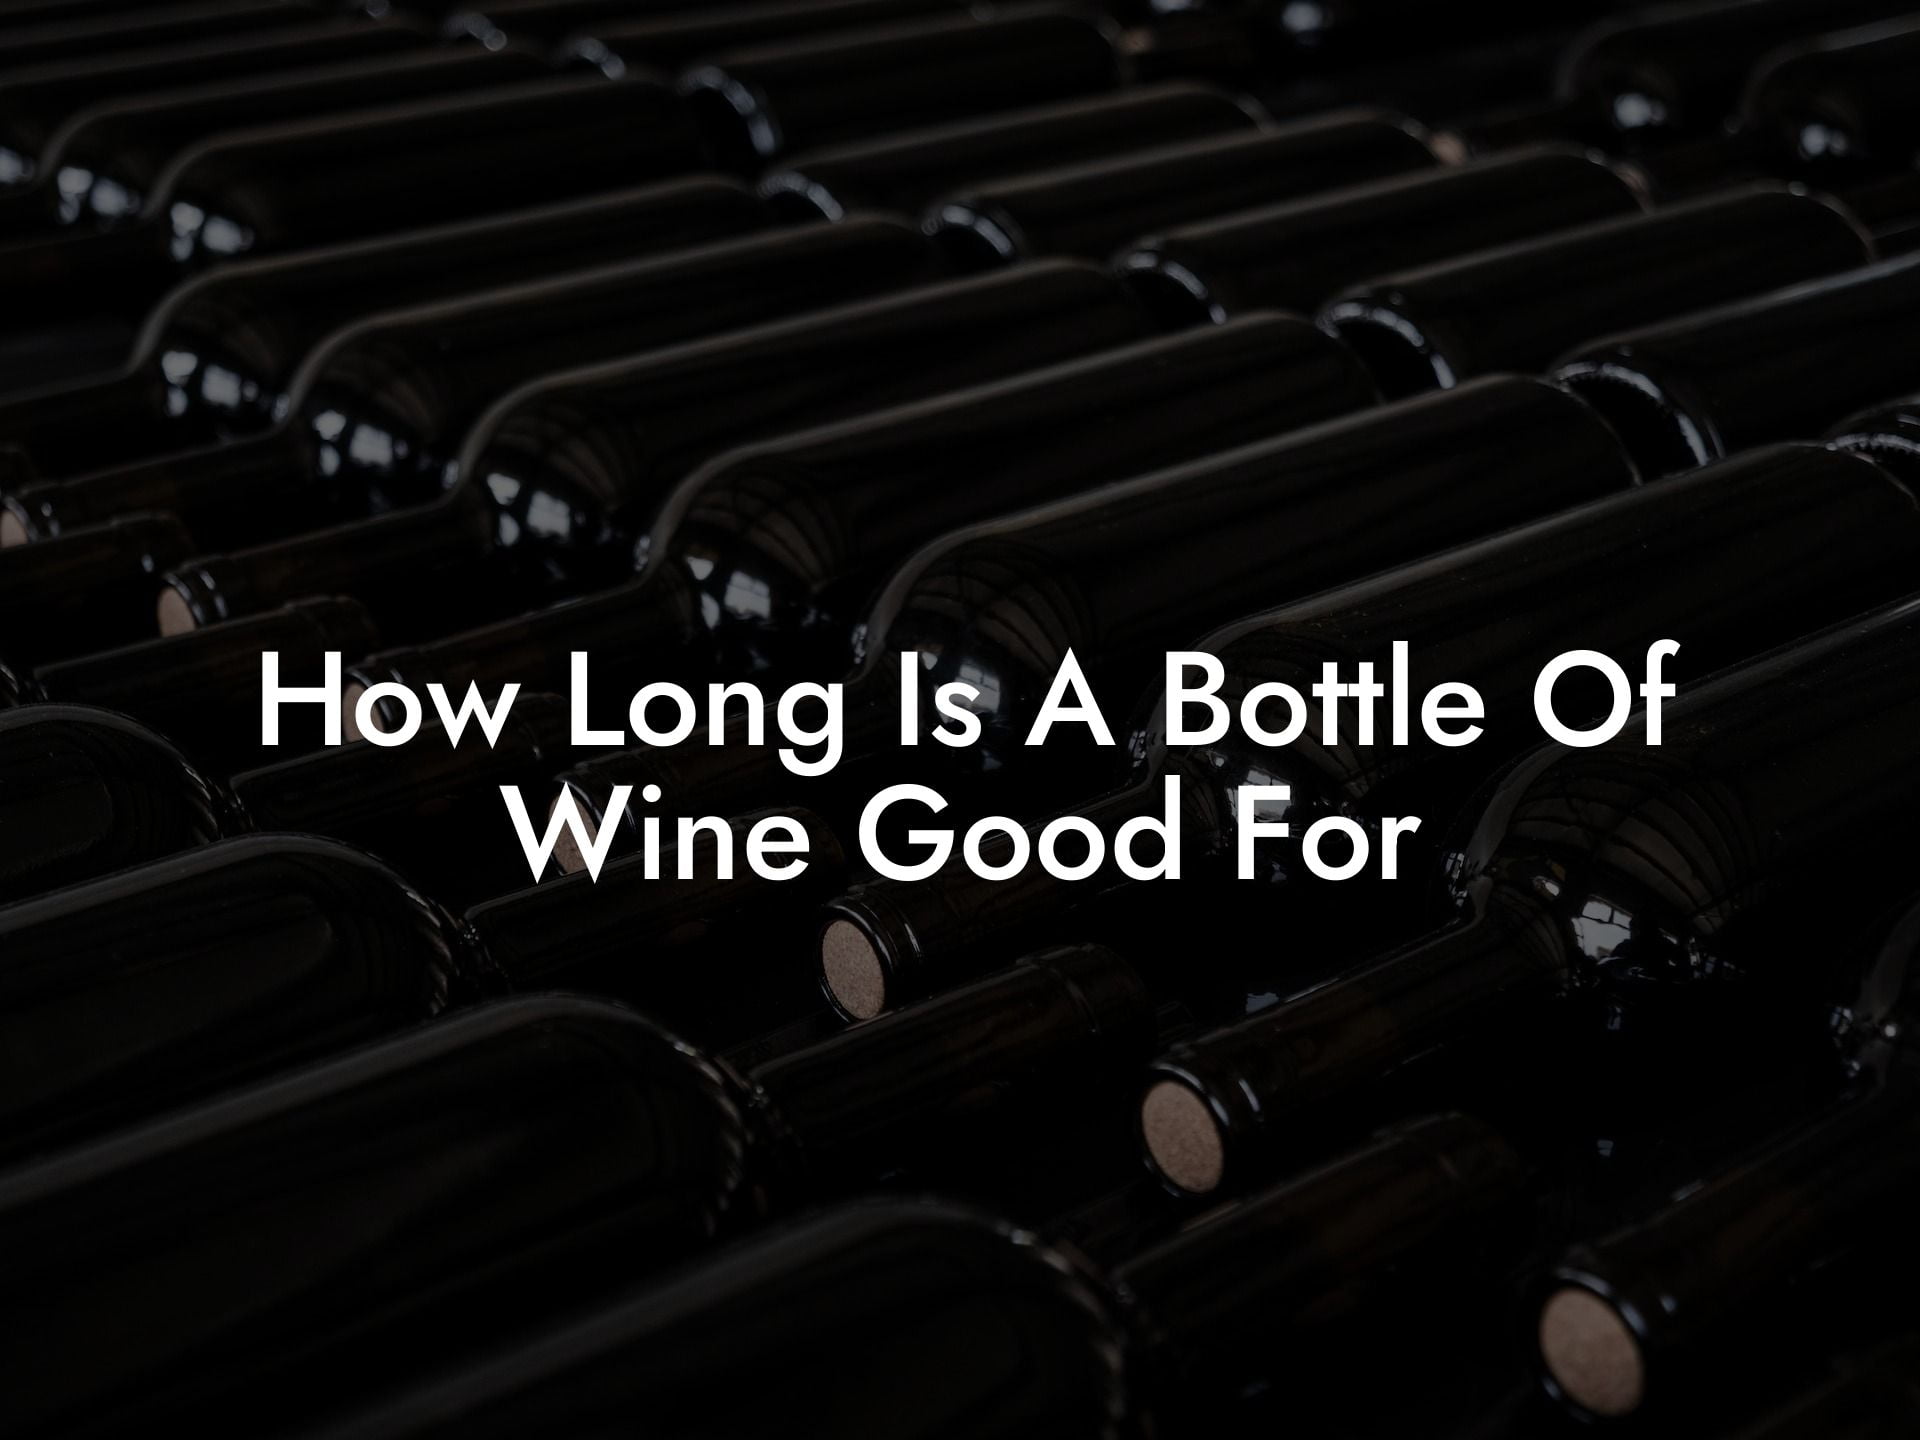 How Long Is A Bottle Of Wine Good For